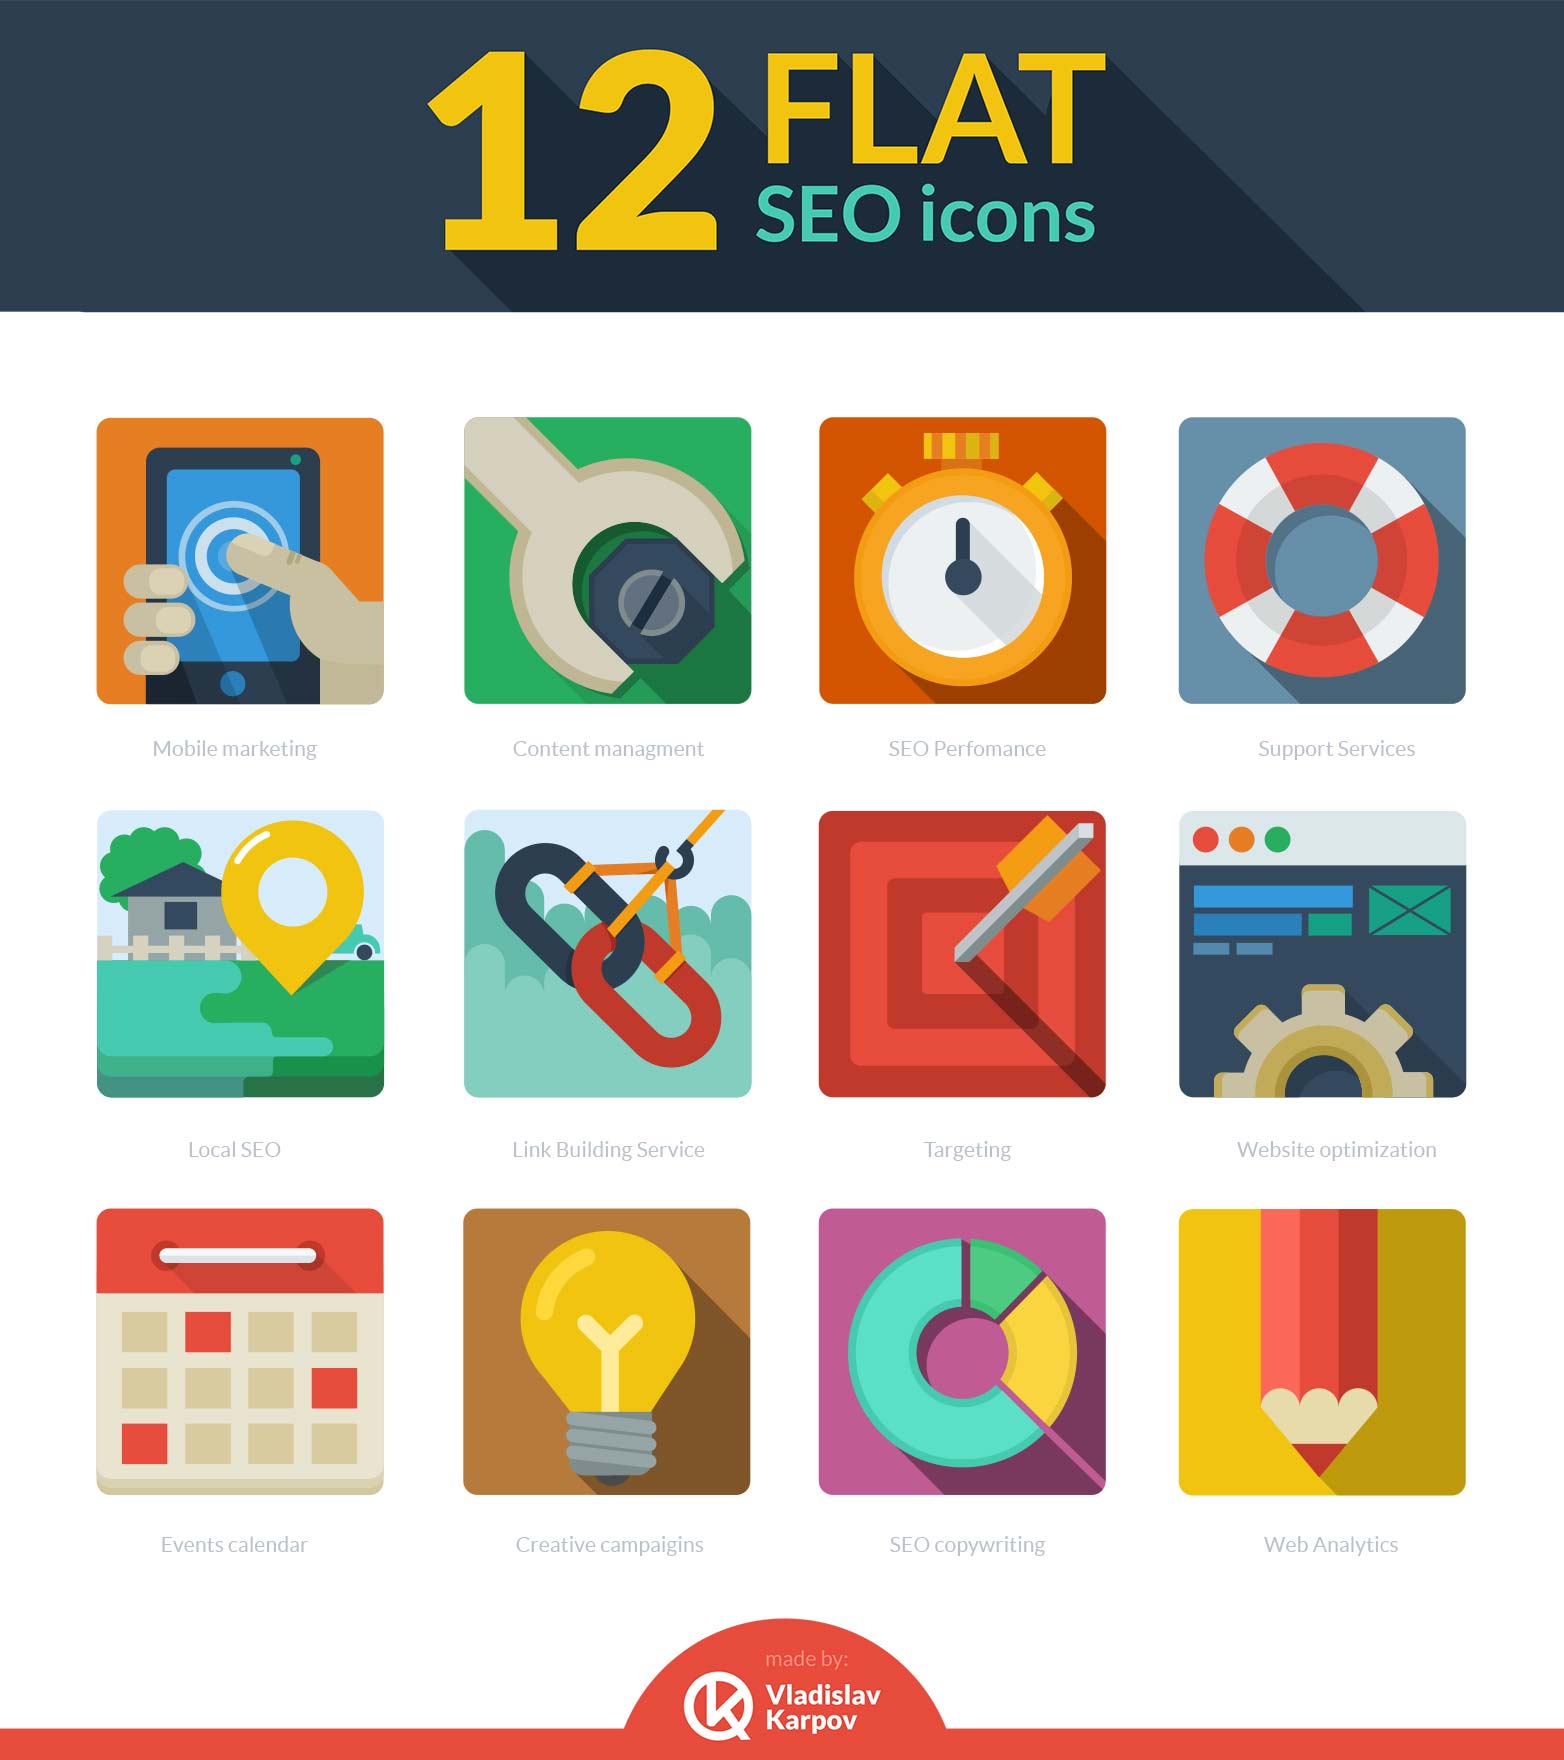 New Flat Icons Sets 2014 | Inspiration | Graphic Design Junction